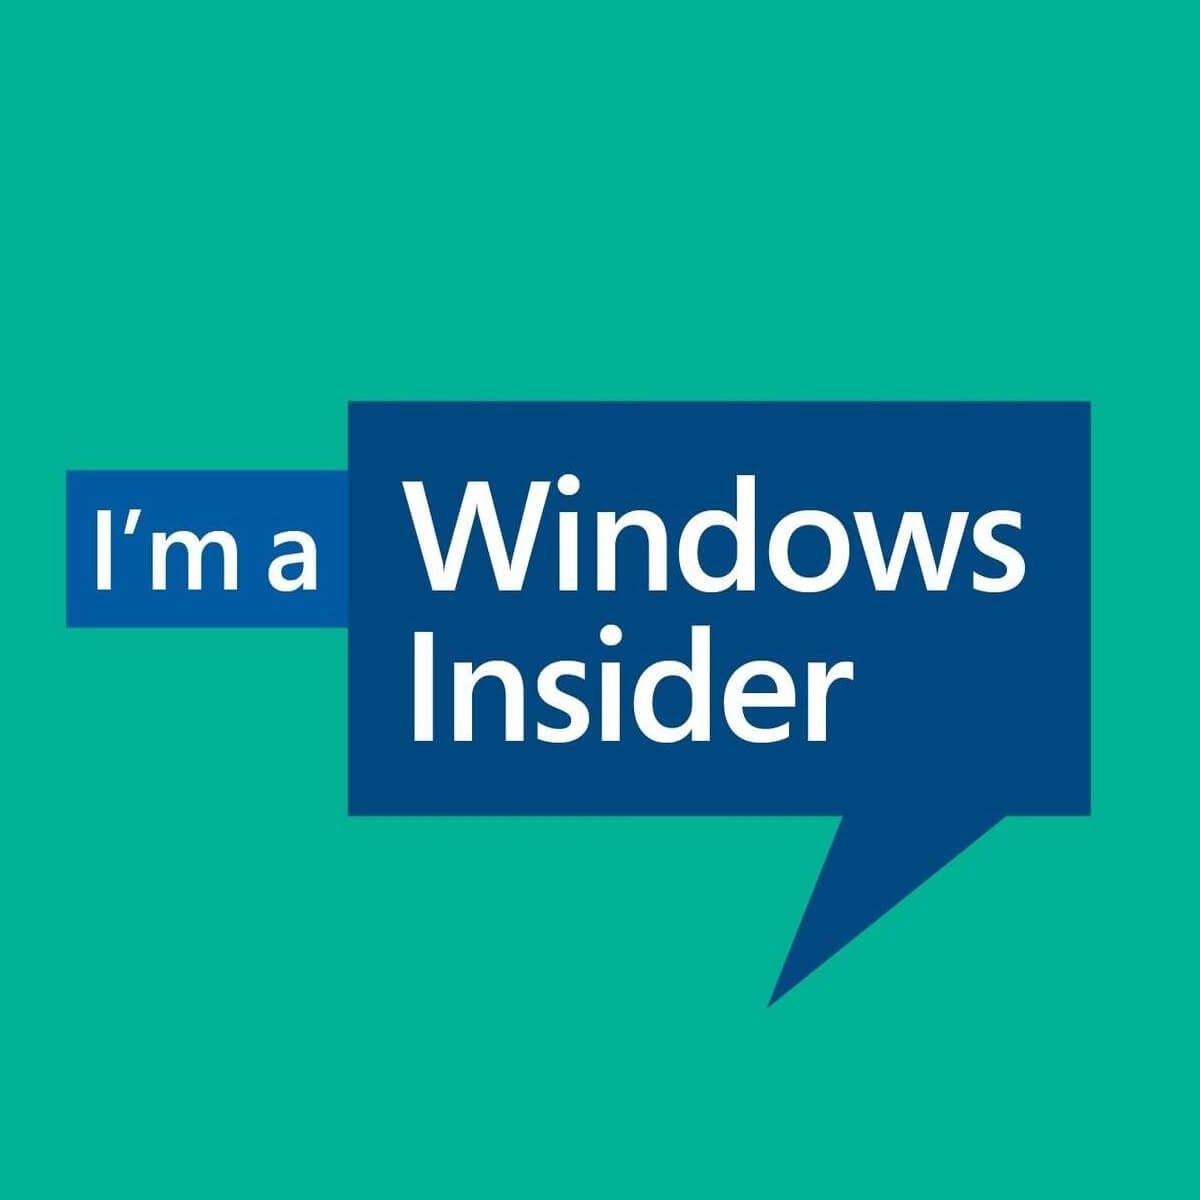 Windows 10 19H2 Build 18362.10006 got released for some lucky insiders